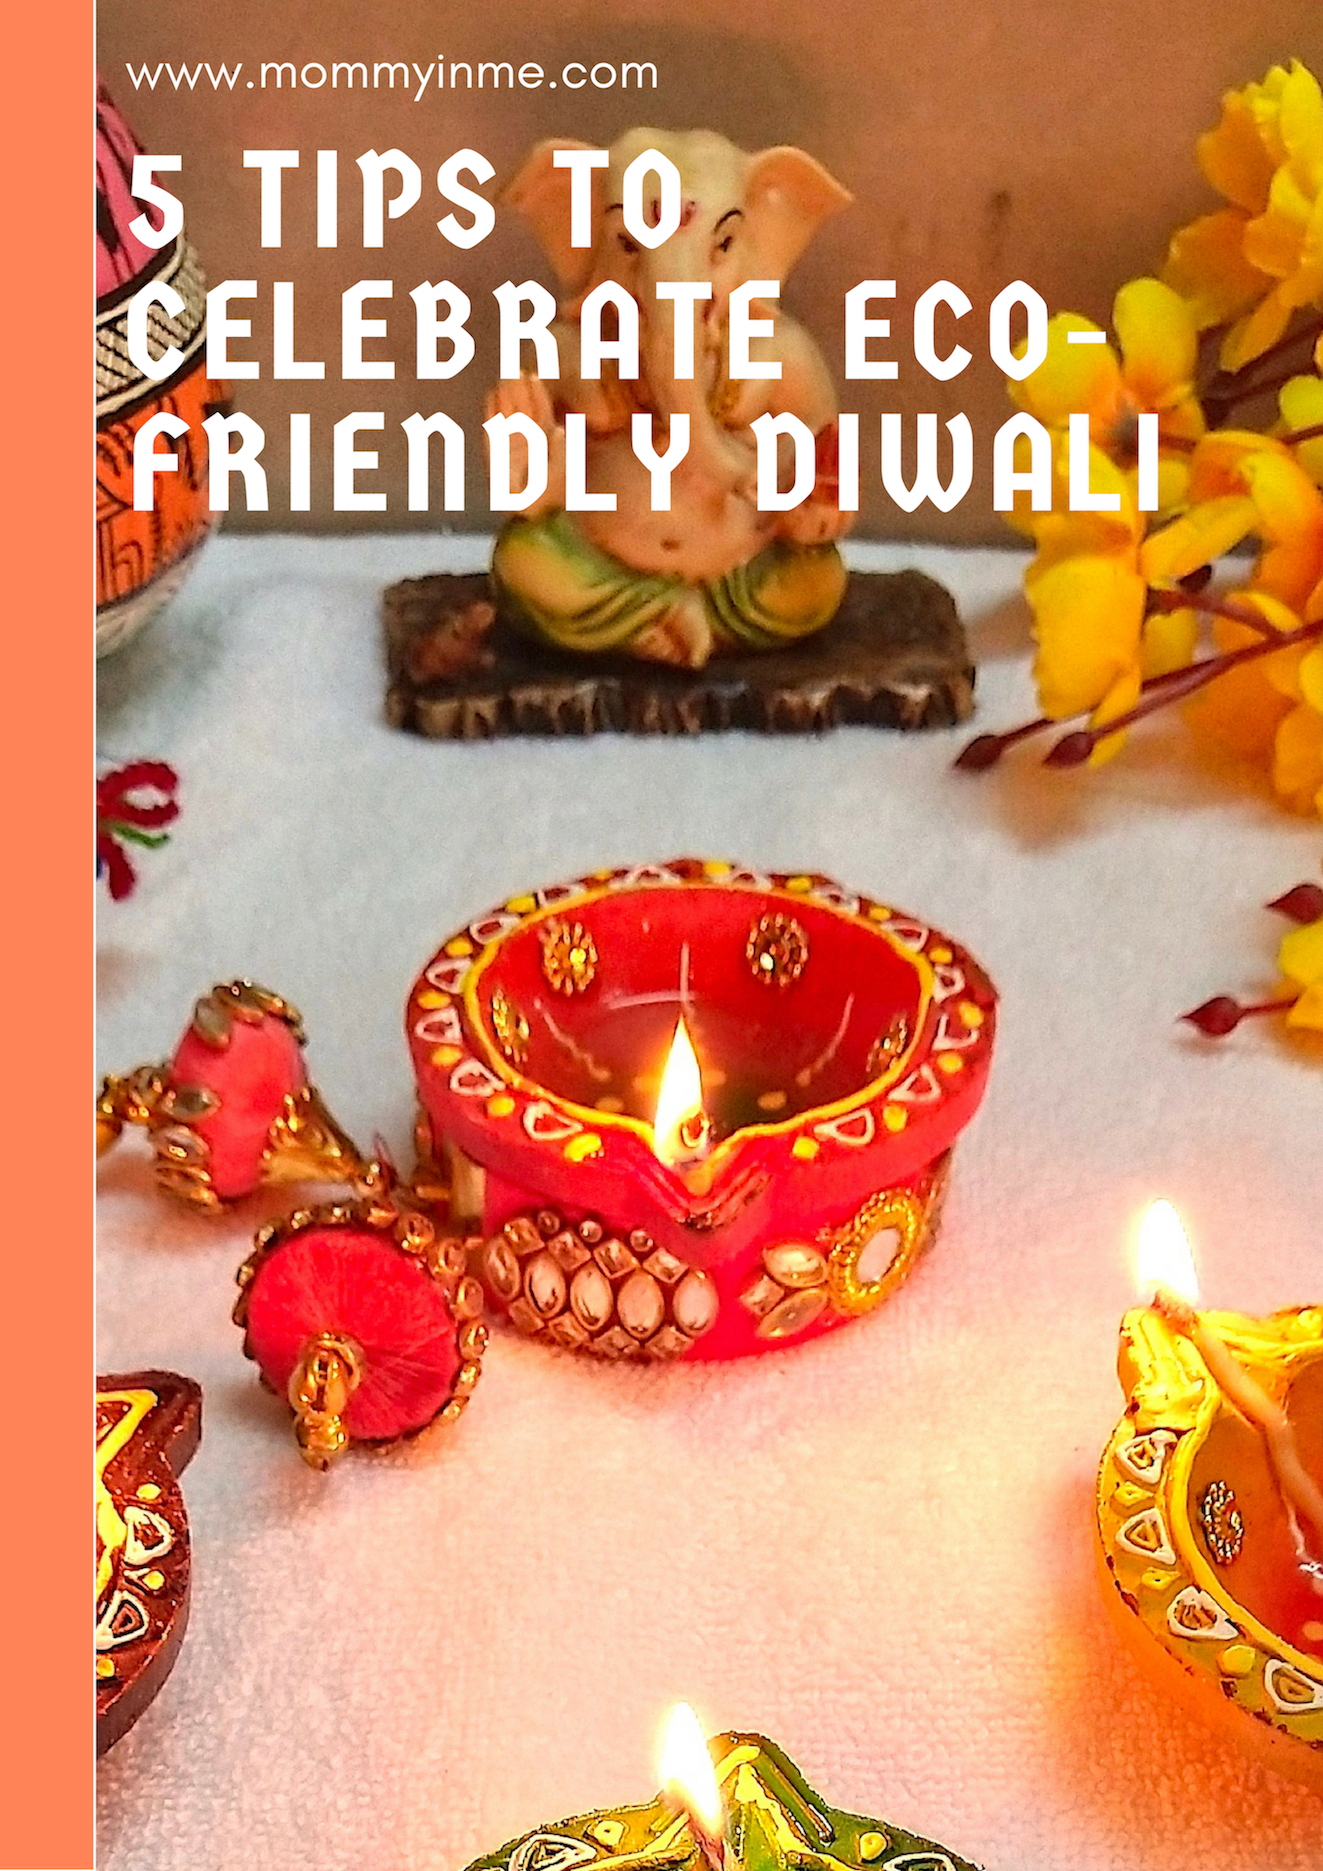 WIth the Air pollution on the rise, with the AQI soaring the levels, why not lets plan to celebrate Ecofriendly Diwali? Read some Tips to celebrate eco friendly diwali with kids #Diwali #Deepavali #festivities #festivaltime #celebrations #ecofriendly 